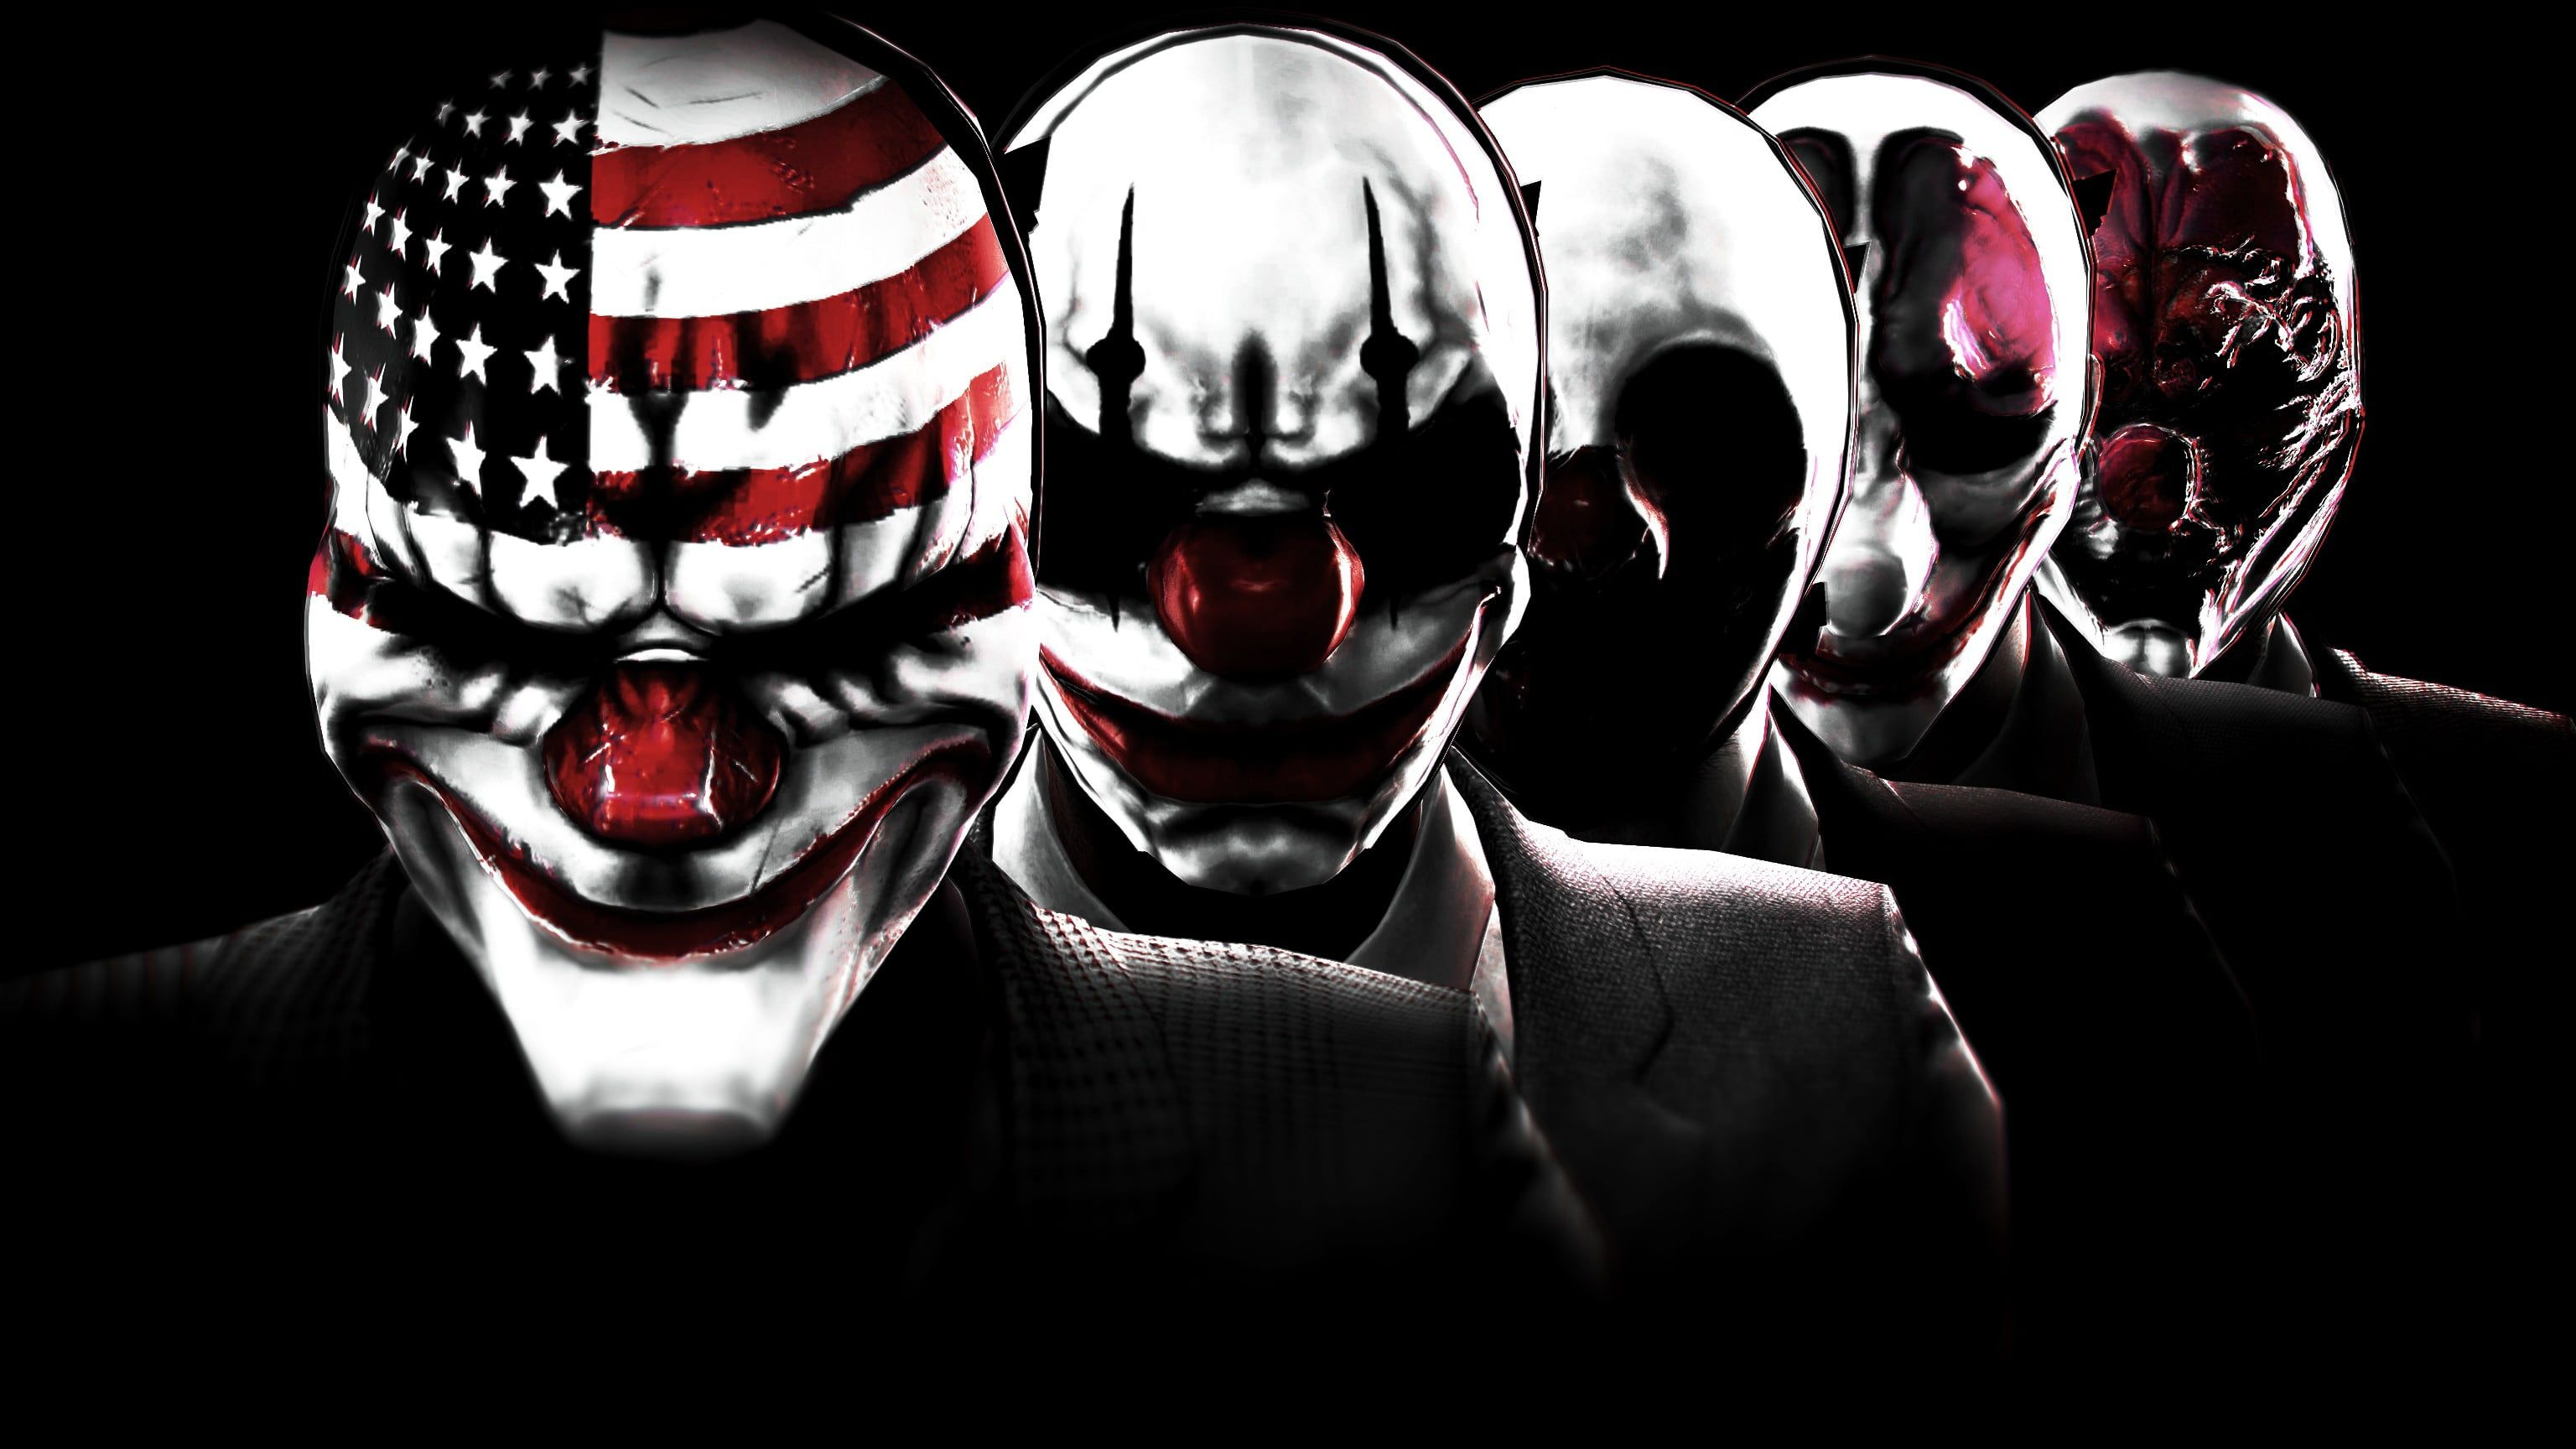 3072x1728 five Halloween masks video games Payday 2 #2K #wallpaper #hdwallpaper #desktop | Payday 2, Payday, Hd wallpaper